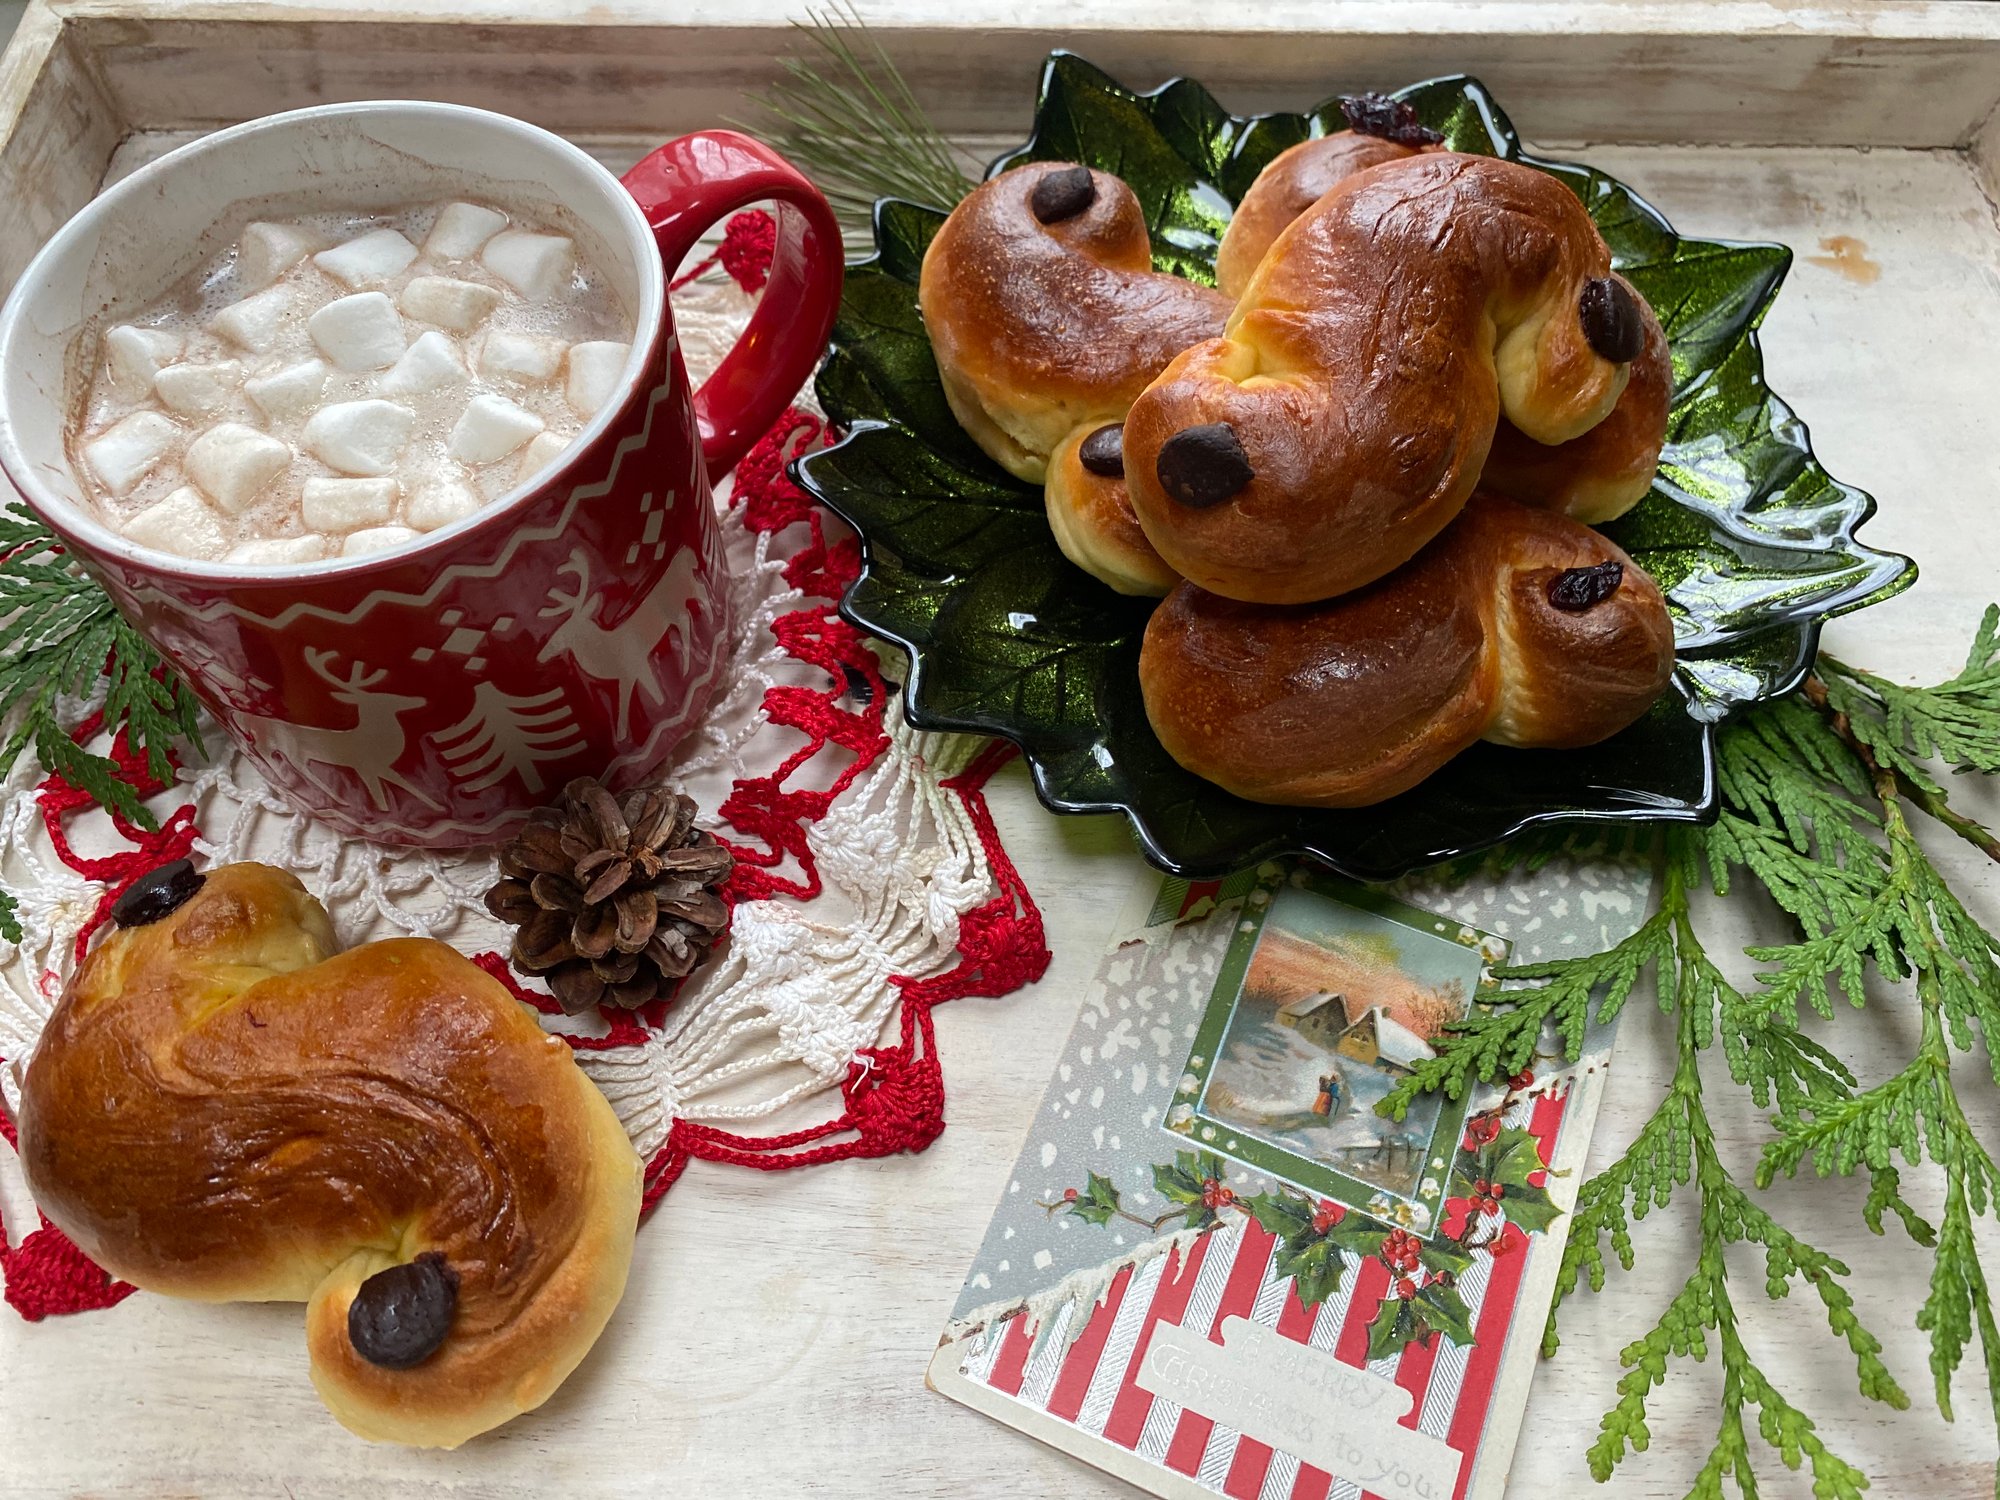 St. Lucia buns and hot chocolate with marshmallows